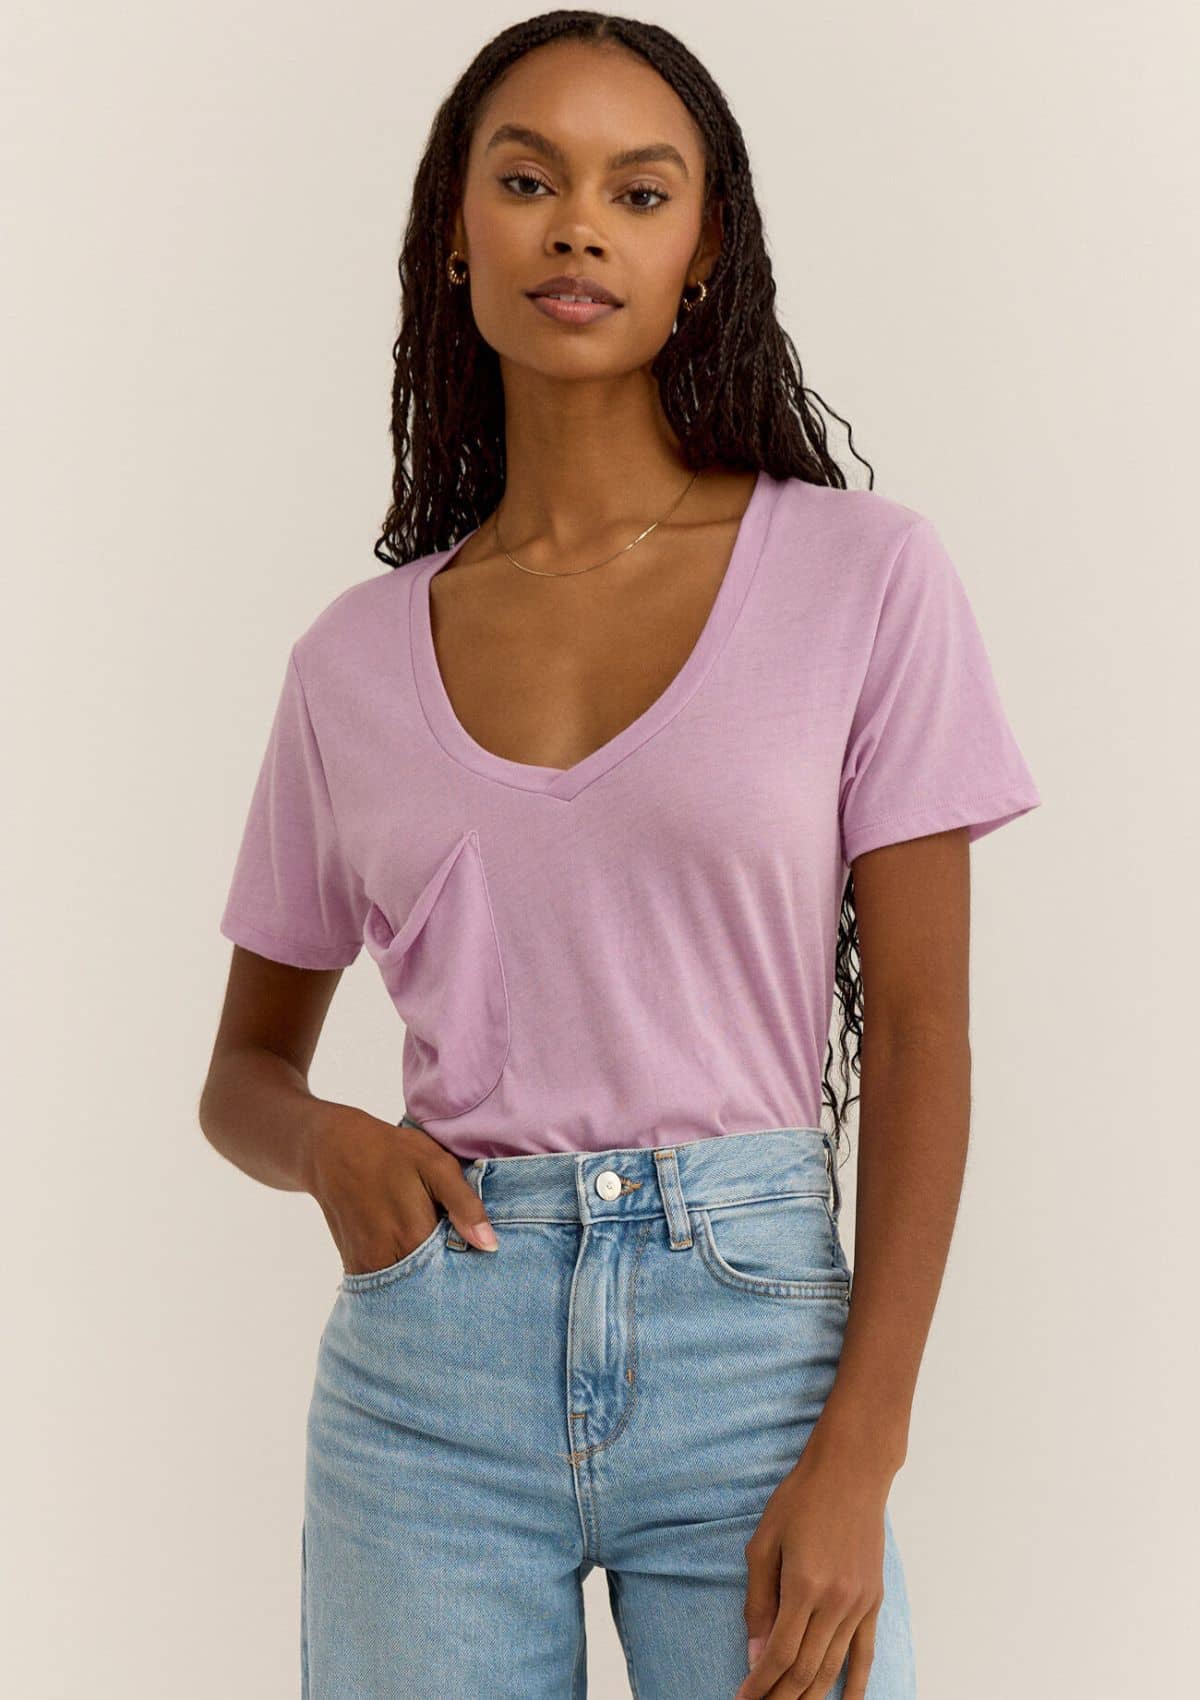 The Pocket Tee - Washed Orchid -Z SUPPLY- Ruby Jane-